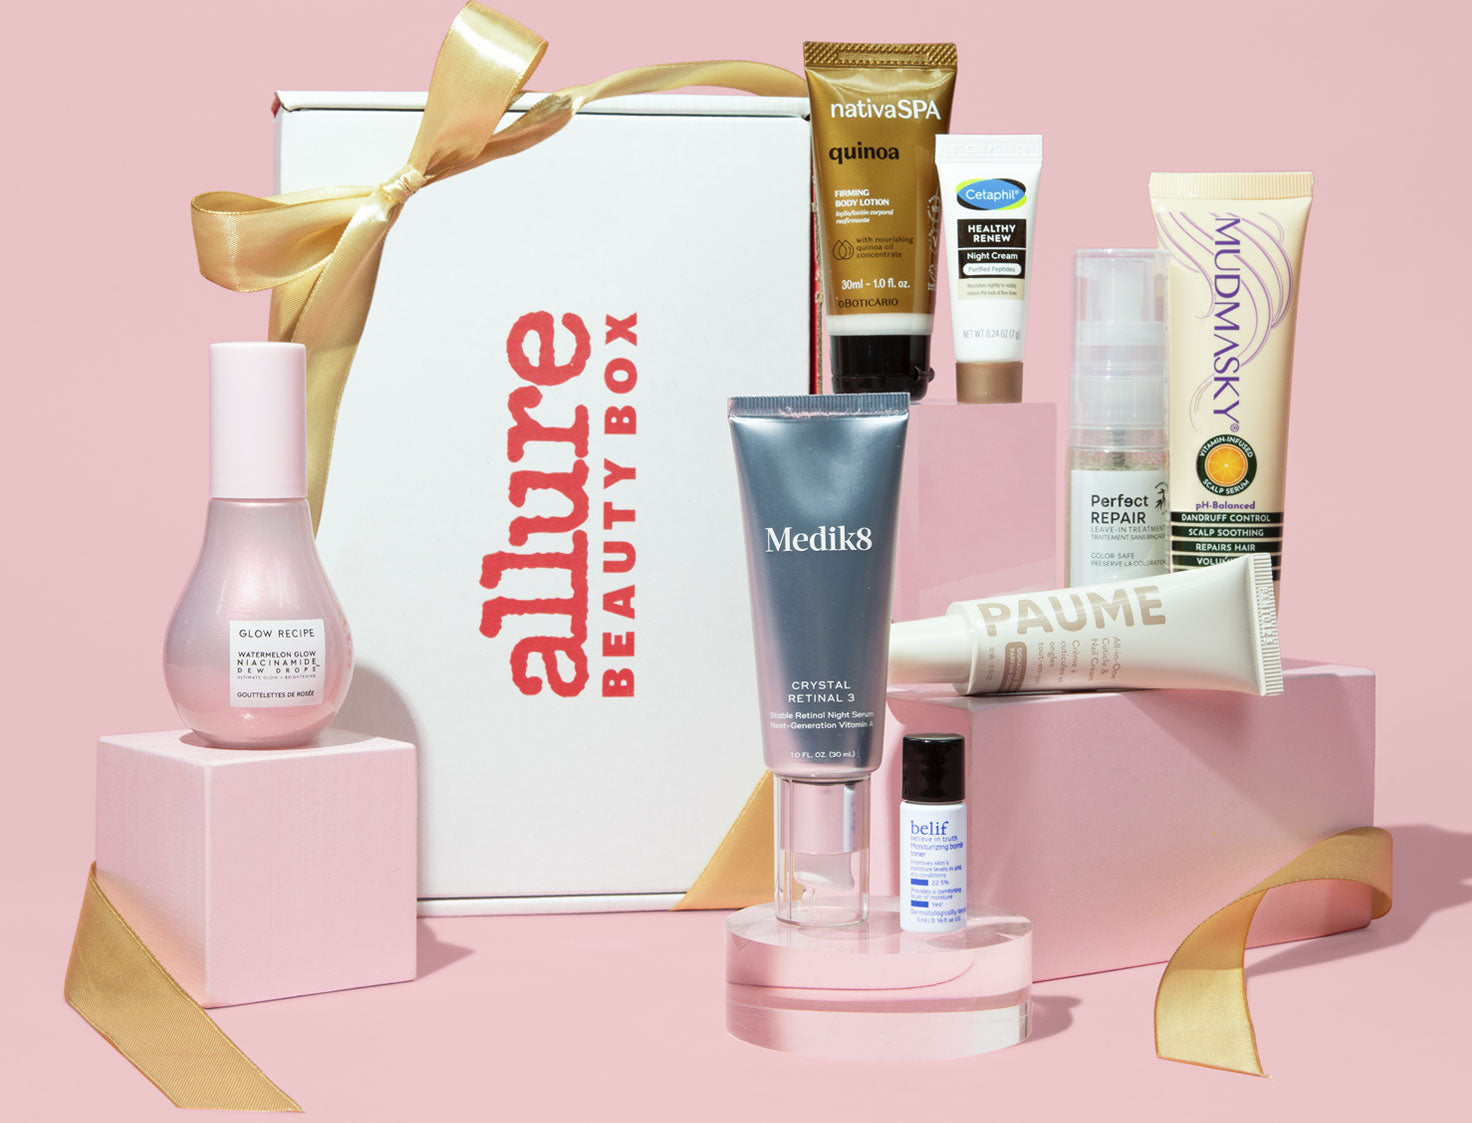 Latest Skincare and Perfume Releases To Check Out